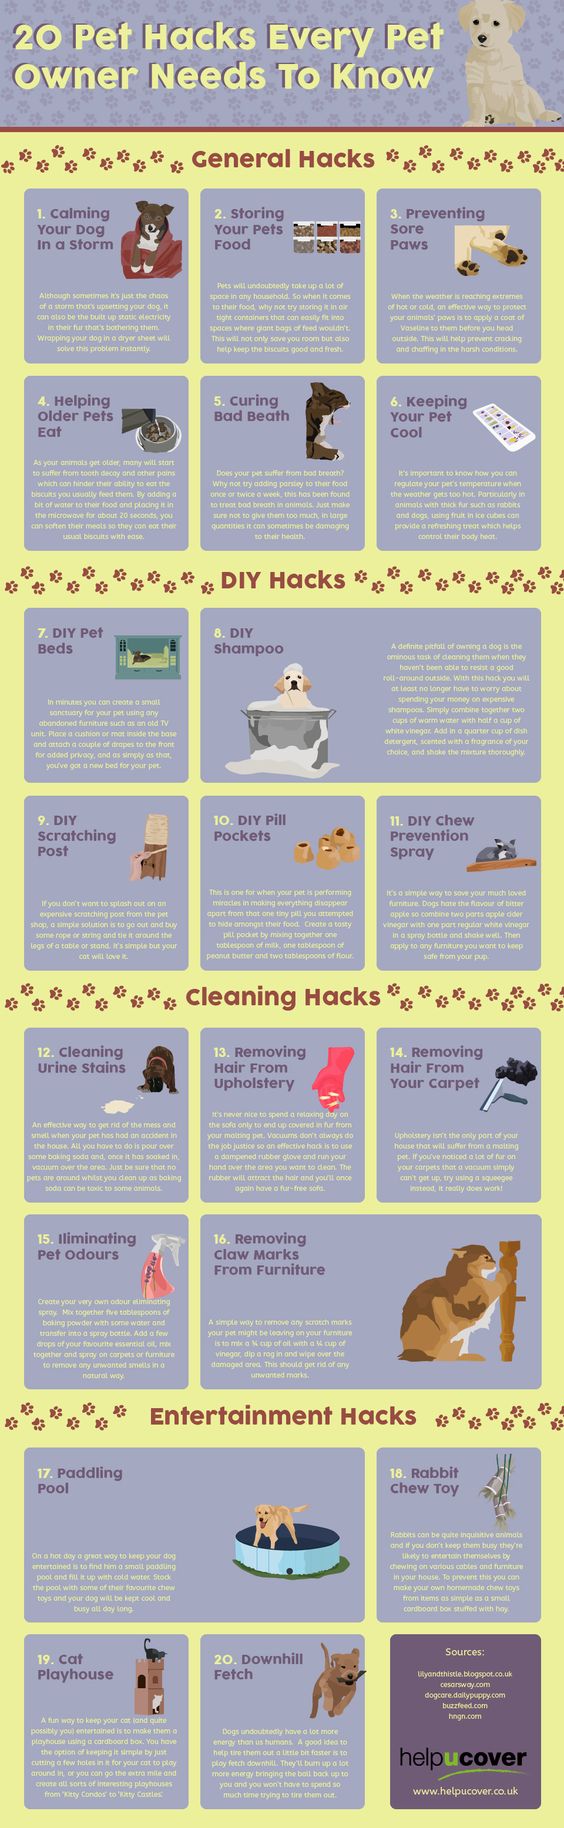 20 Pet Hacks Every Pet Owner Needs To Know